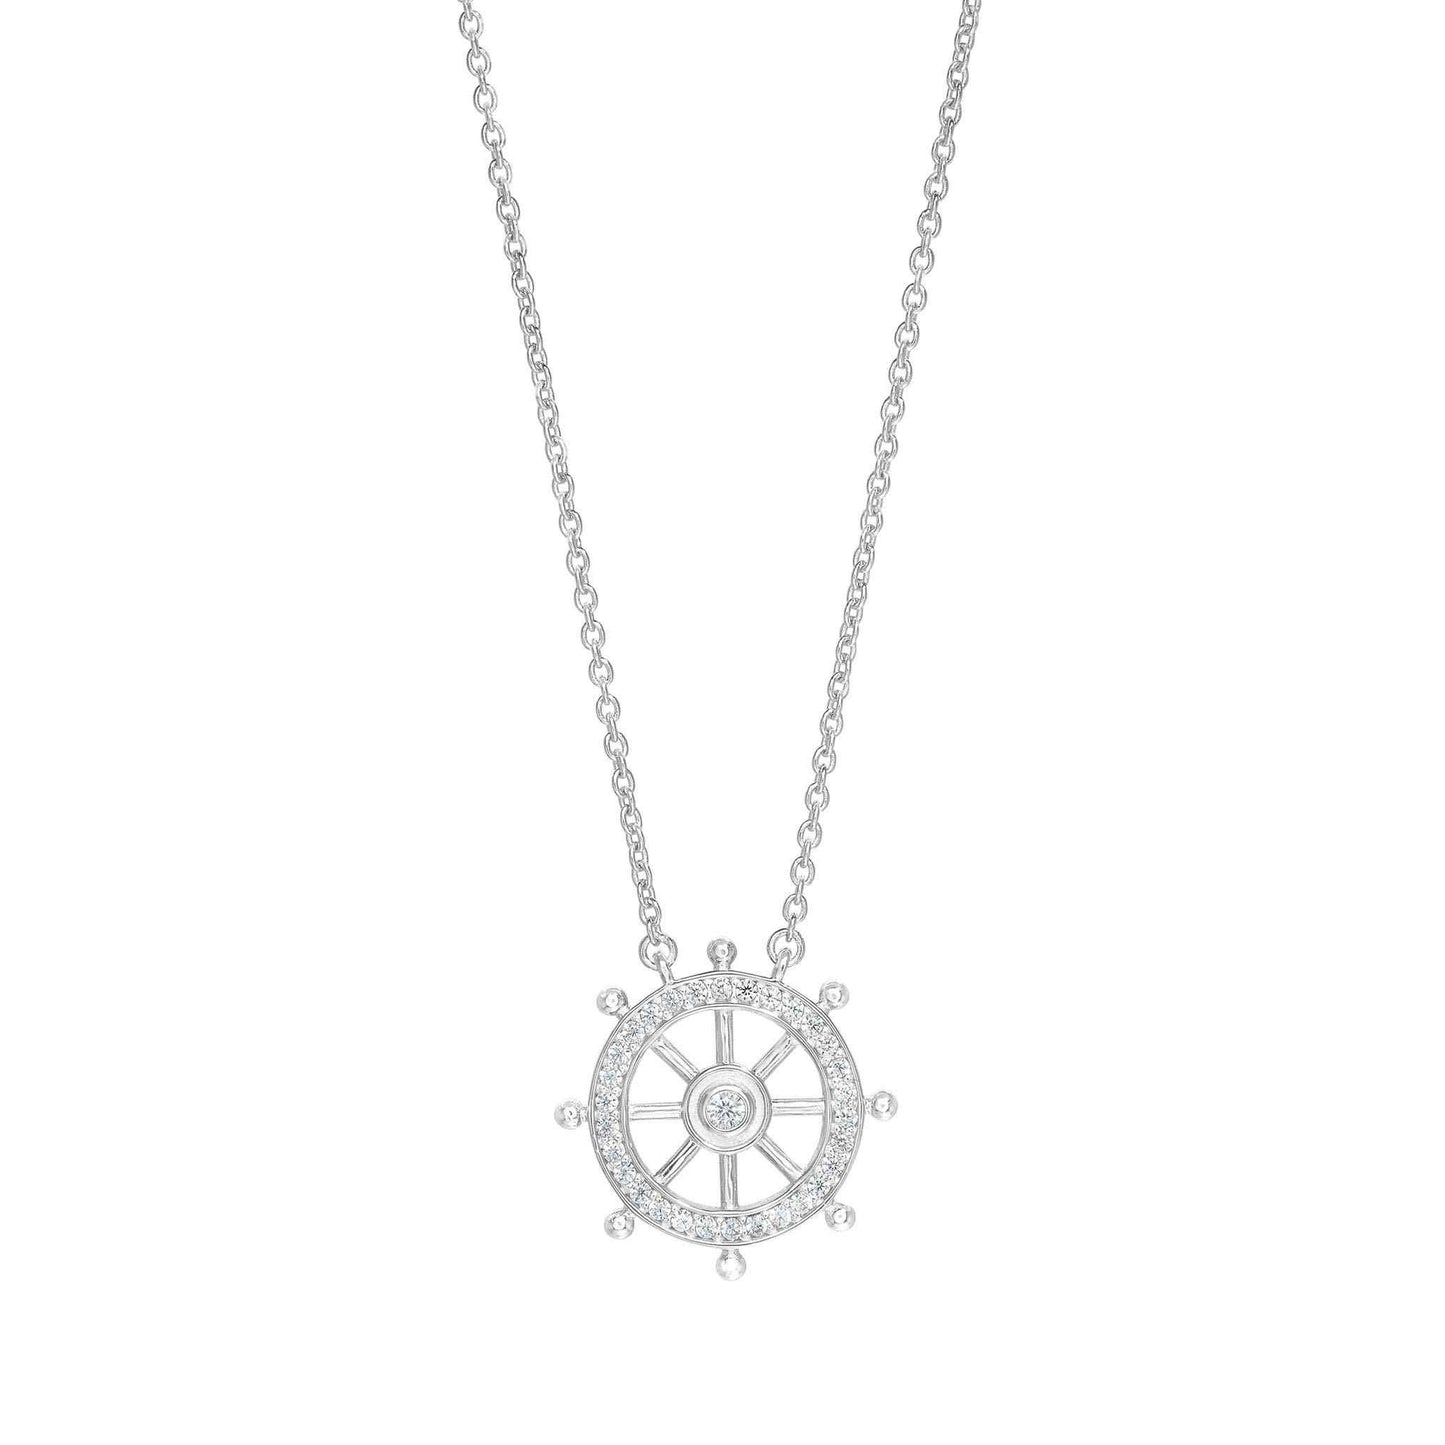 A ship's wheel necklace with simulated diamonds displayed on a neutral white background.